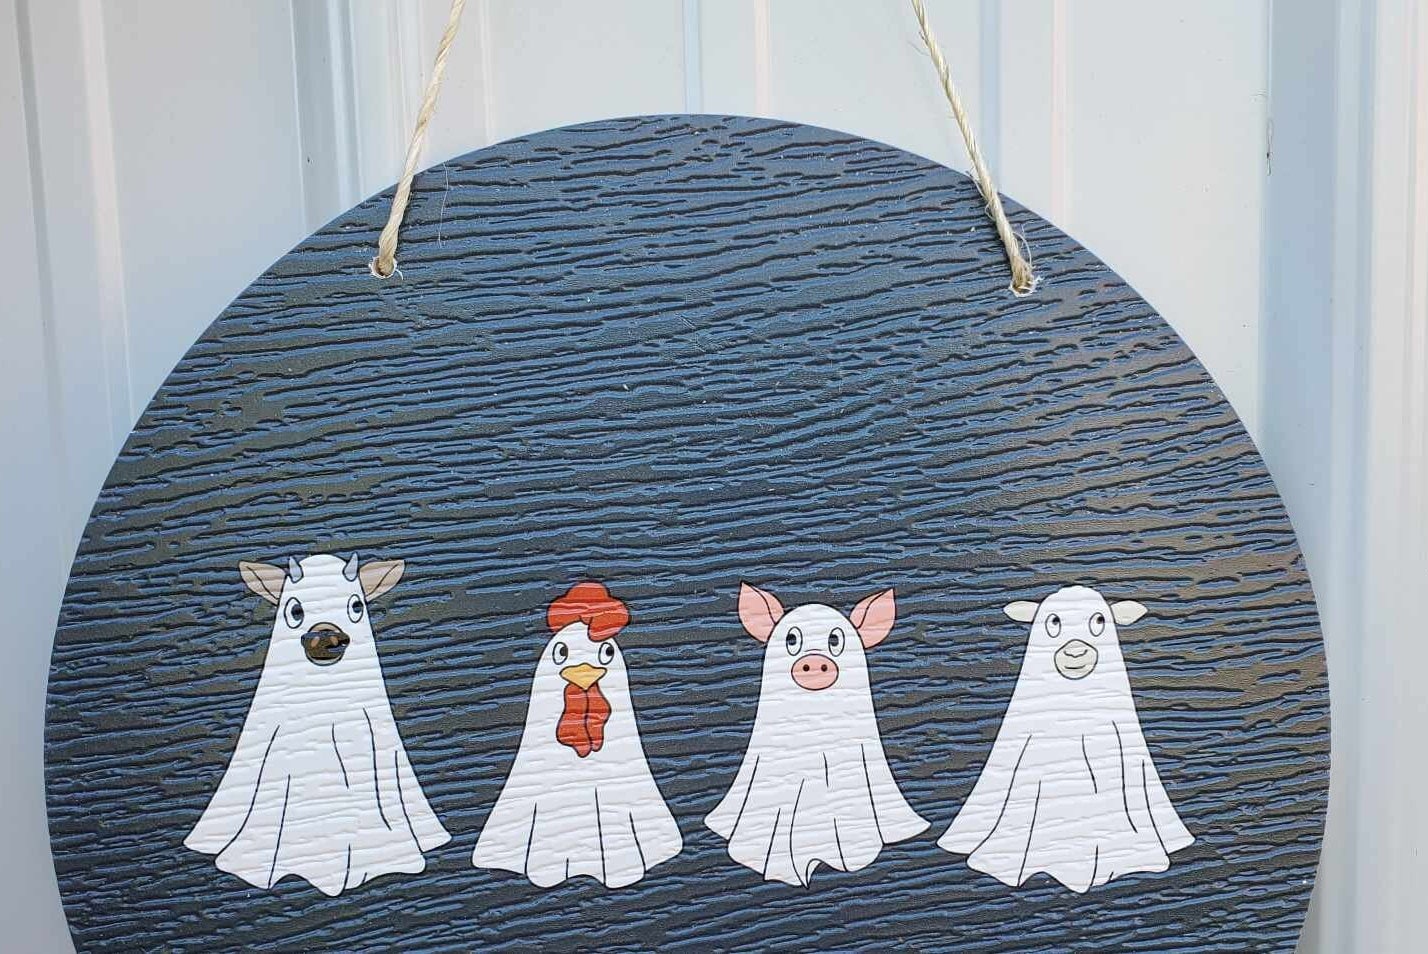 Baby Farm Animals Trick or Treat Cow Sheep Chicken Halloween Ghosts Dress Up Fall Autumn PVC Weather Proof Printed Doorhanger Outdoor